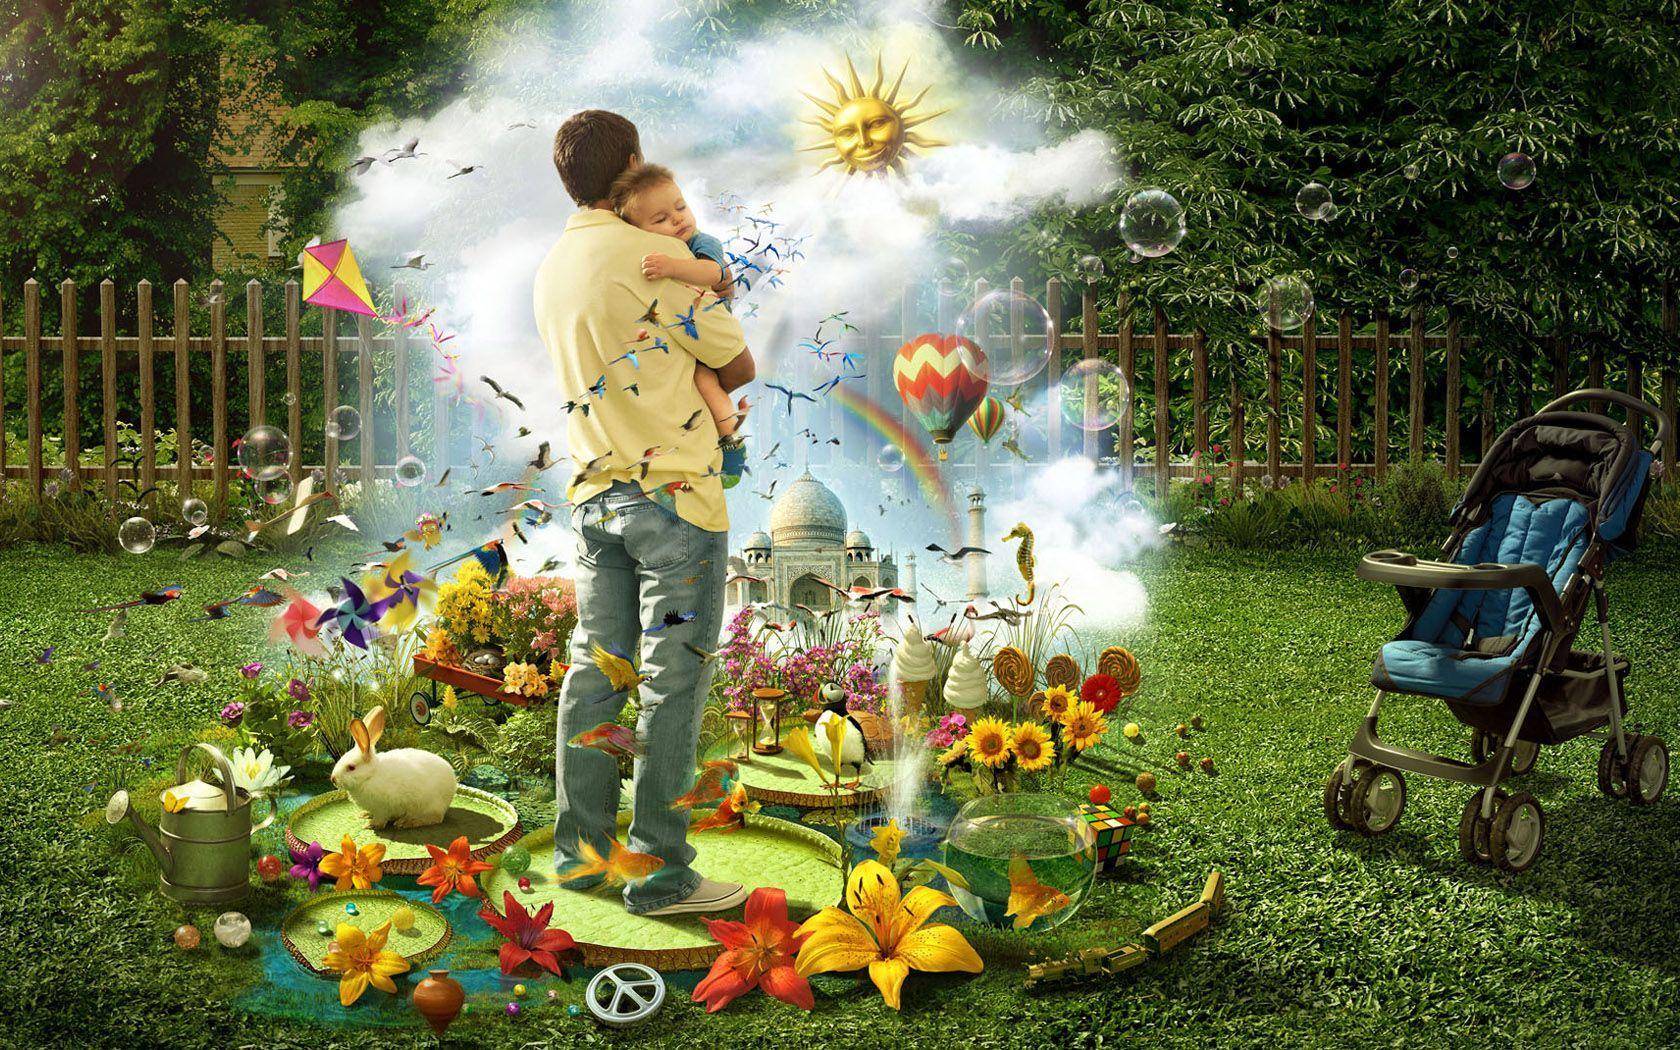 Imagination wallpaper and image, picture, photo